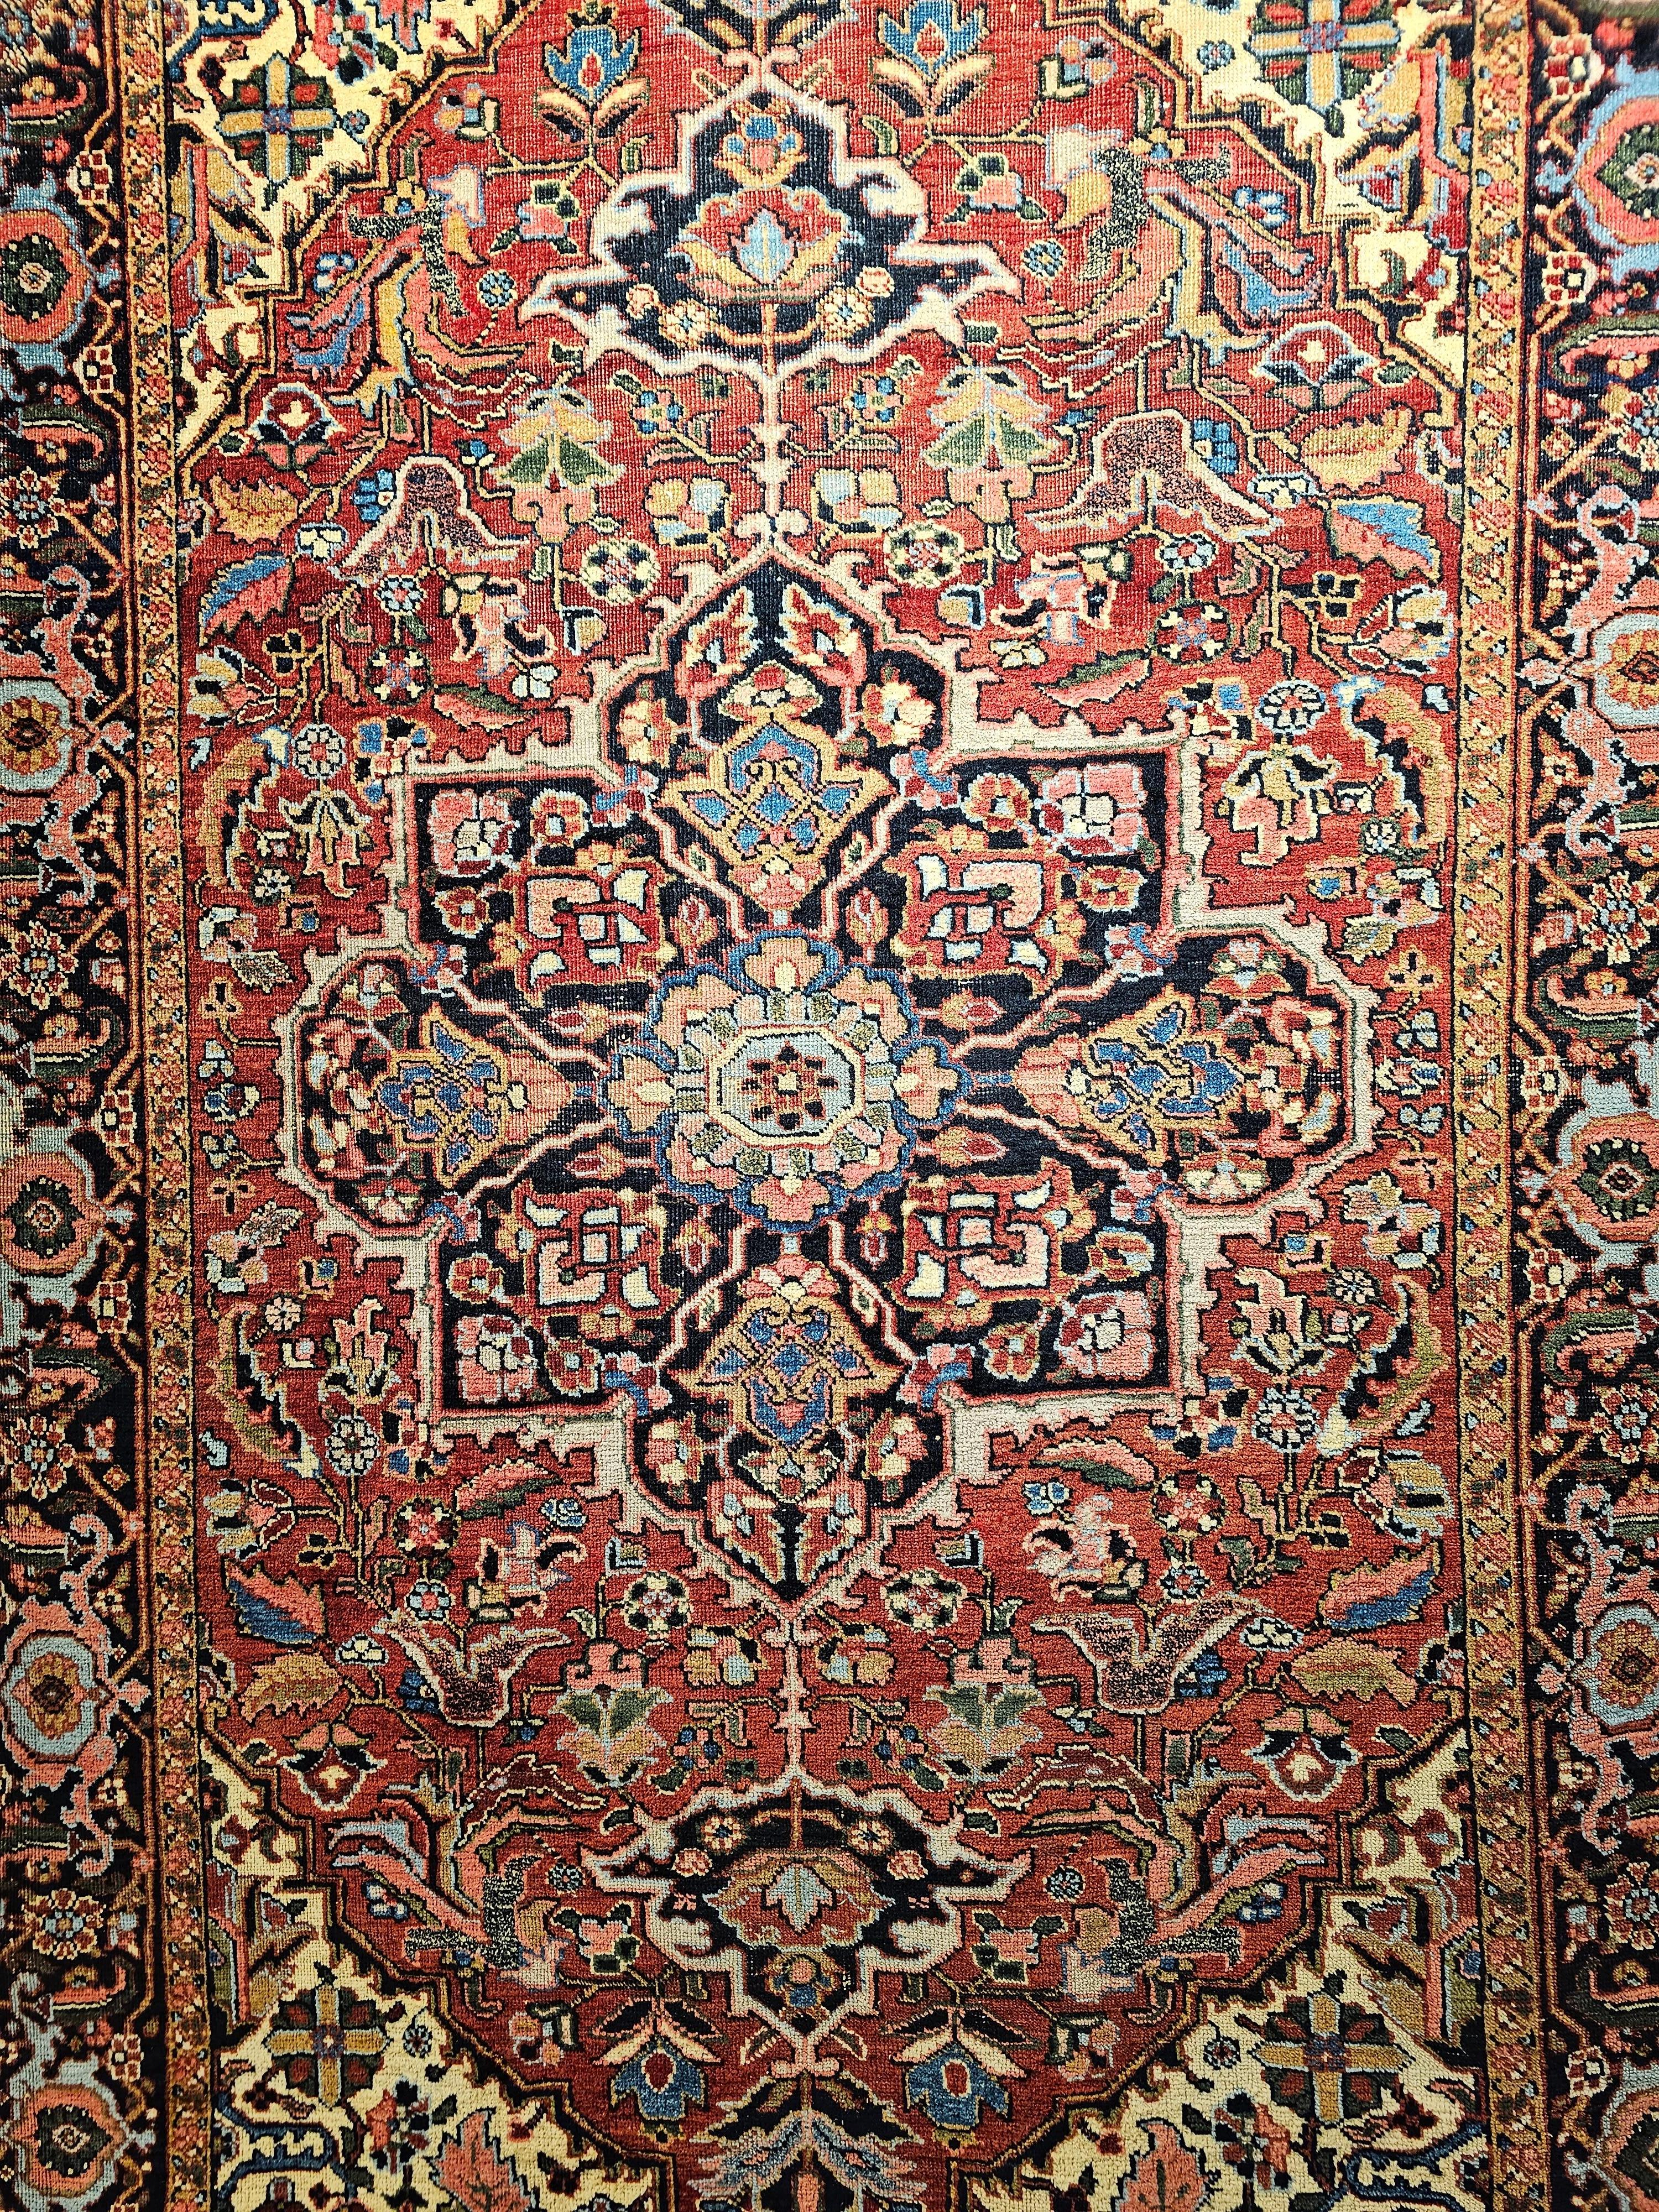 A vintage room size Persian Heriz from the 1st quarter of the 1900s. It has a burgundy color field and a navy blue border. The rug has a large format design and beautiful combination of colors including yellow, baby blue, pink, green and many others